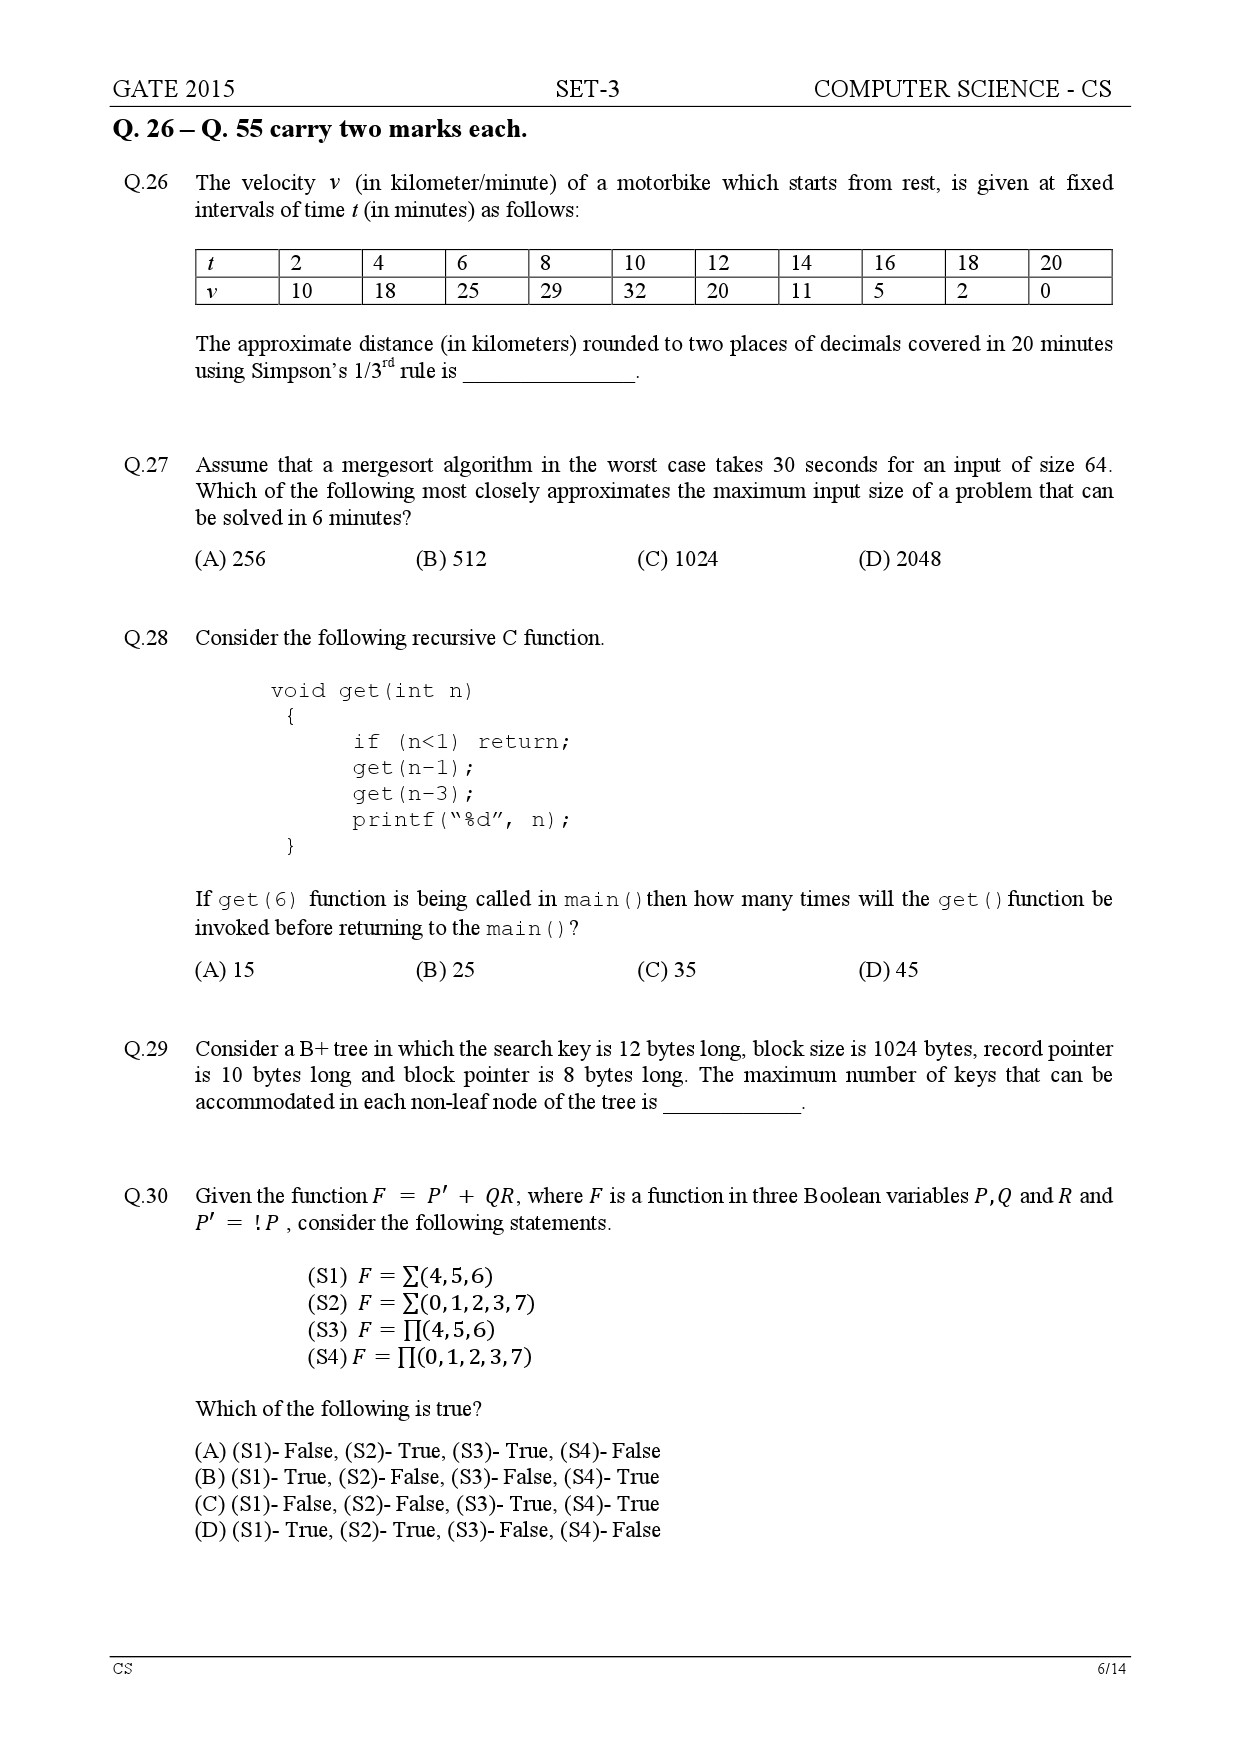 GATE Exam Question Paper 2015 Computer Science and Information Technology Set 3 6